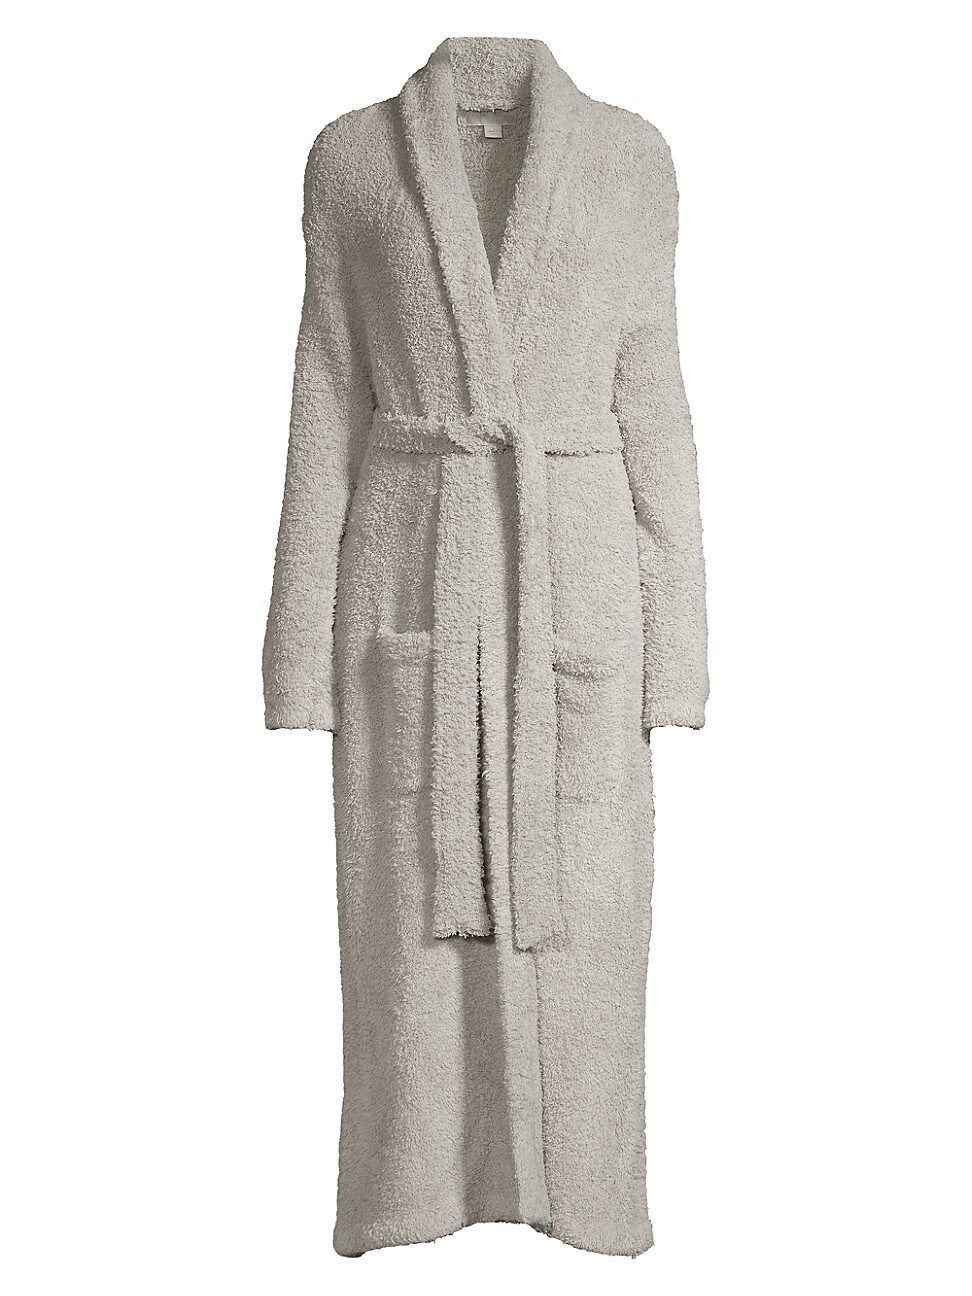 Barefoot Dreams Women's Cozychic Robe - Dove - Size Large | Saks Fifth Avenue